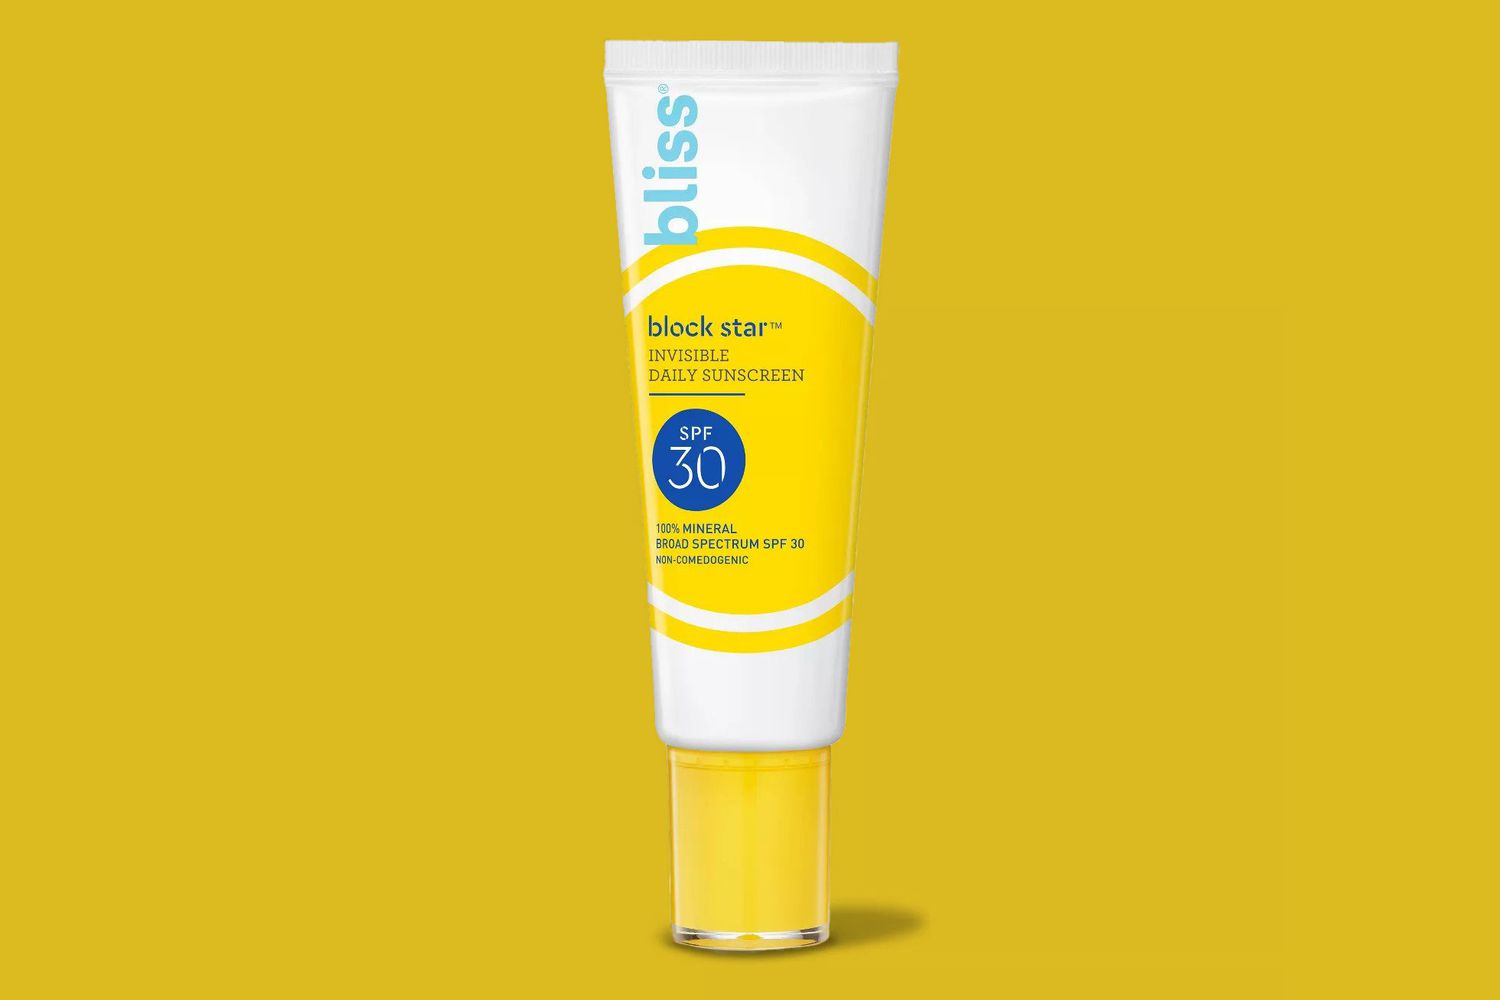 bliss Block Star Invisible Daily Sunscreen